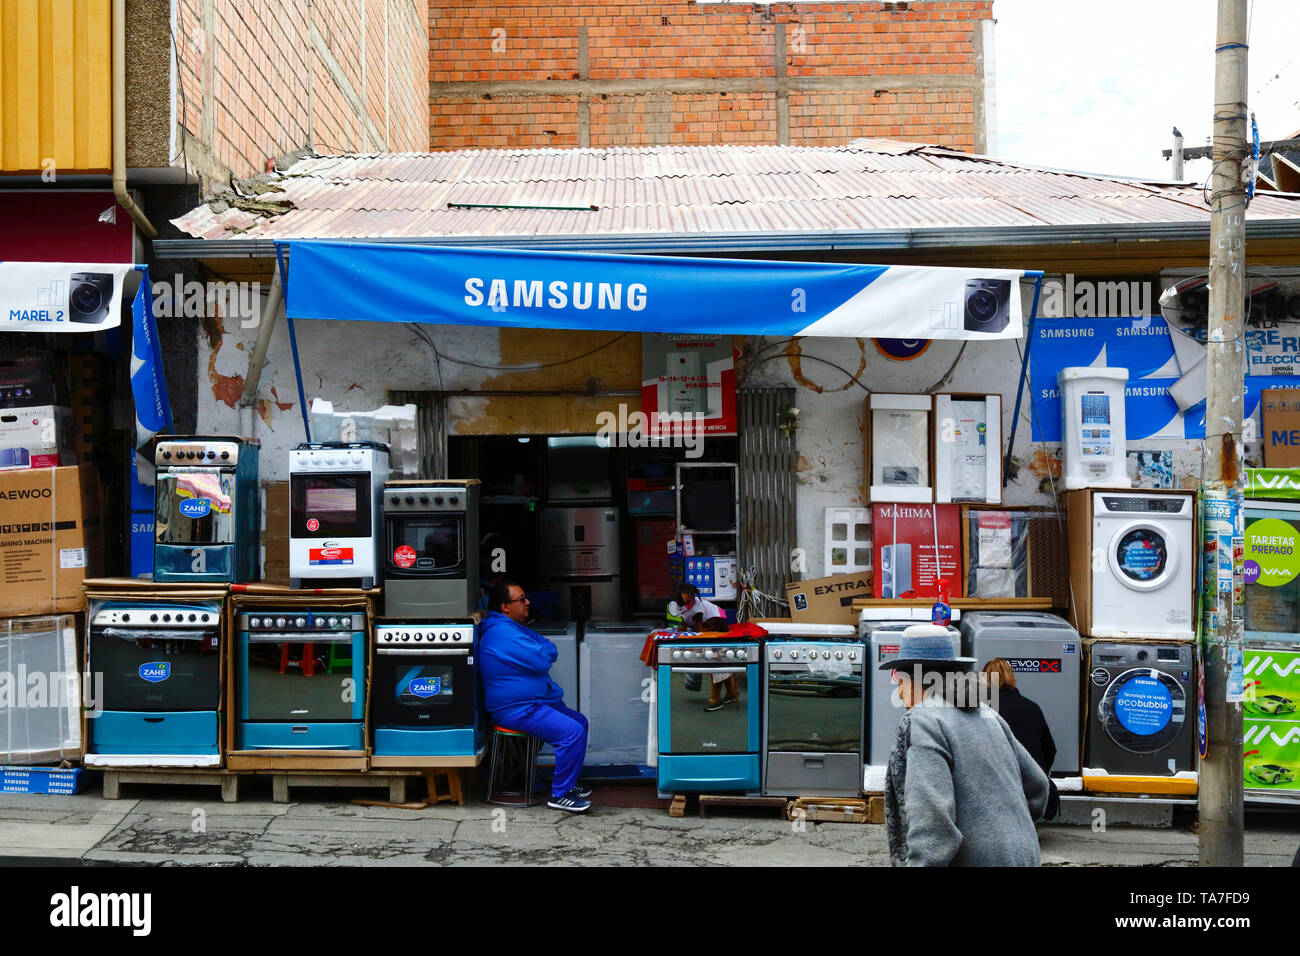 Samsung shop selling cookers and other kitchen appliances in contraband electronics market area, La Paz, Bolivia Stock Photo